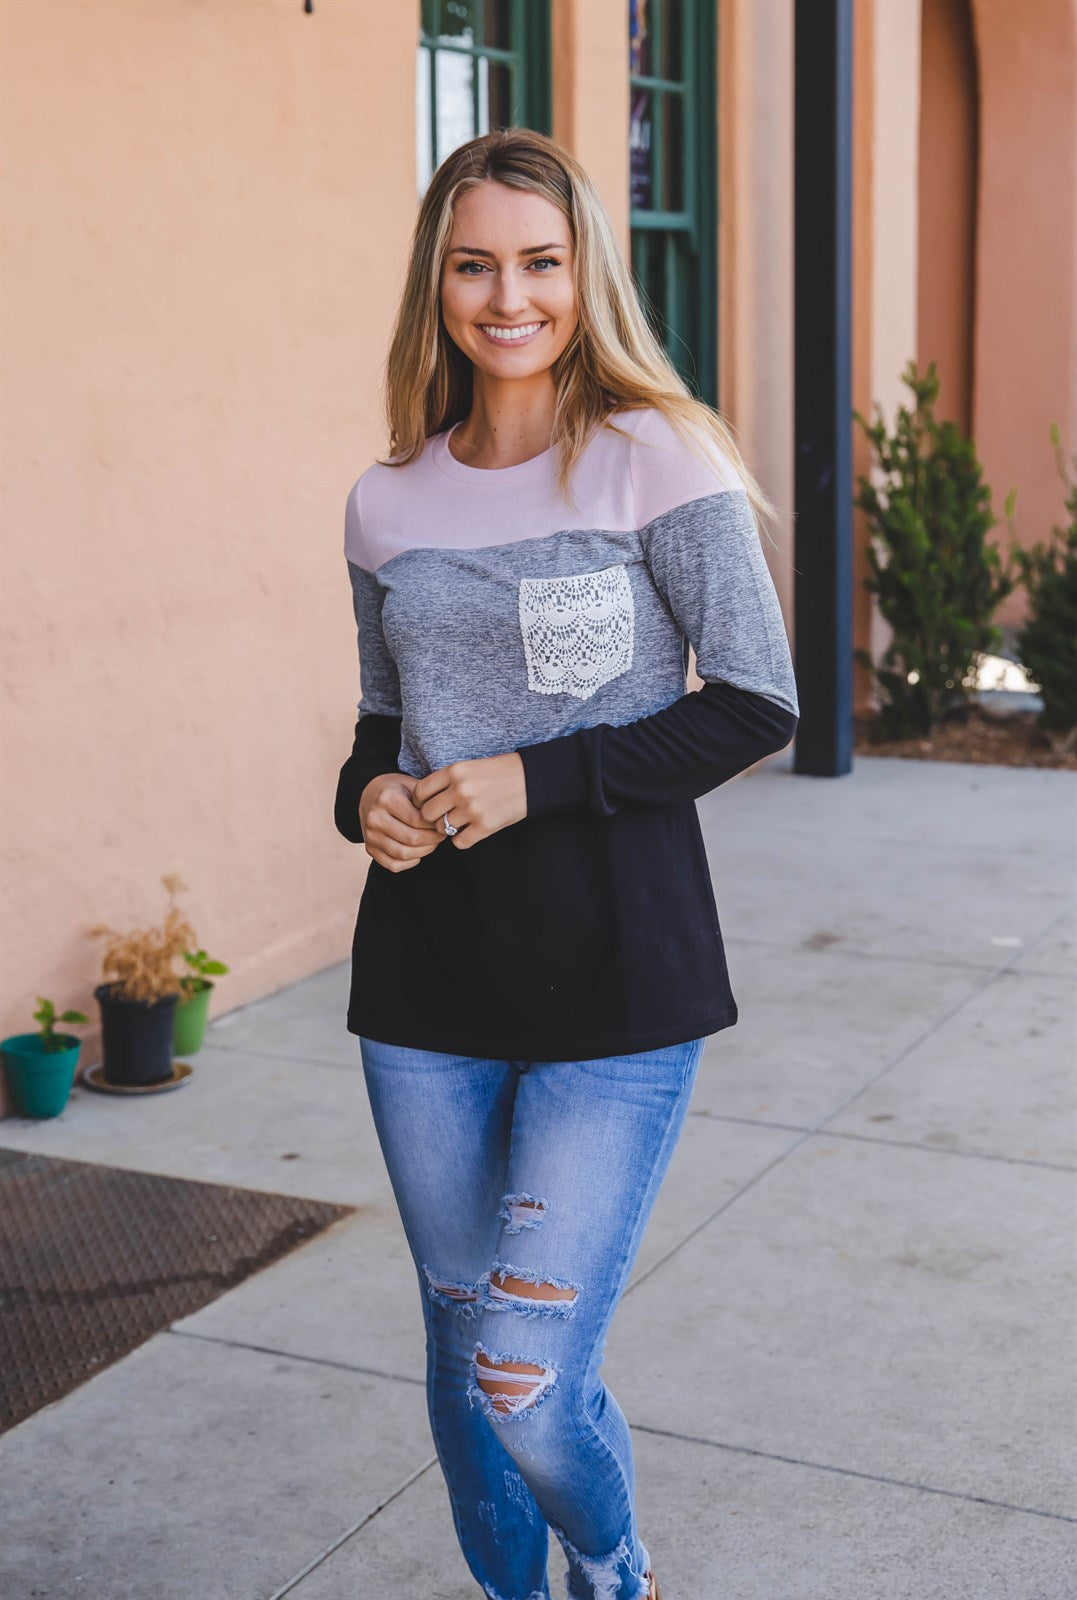 The Lace Pocket Colorblock Top